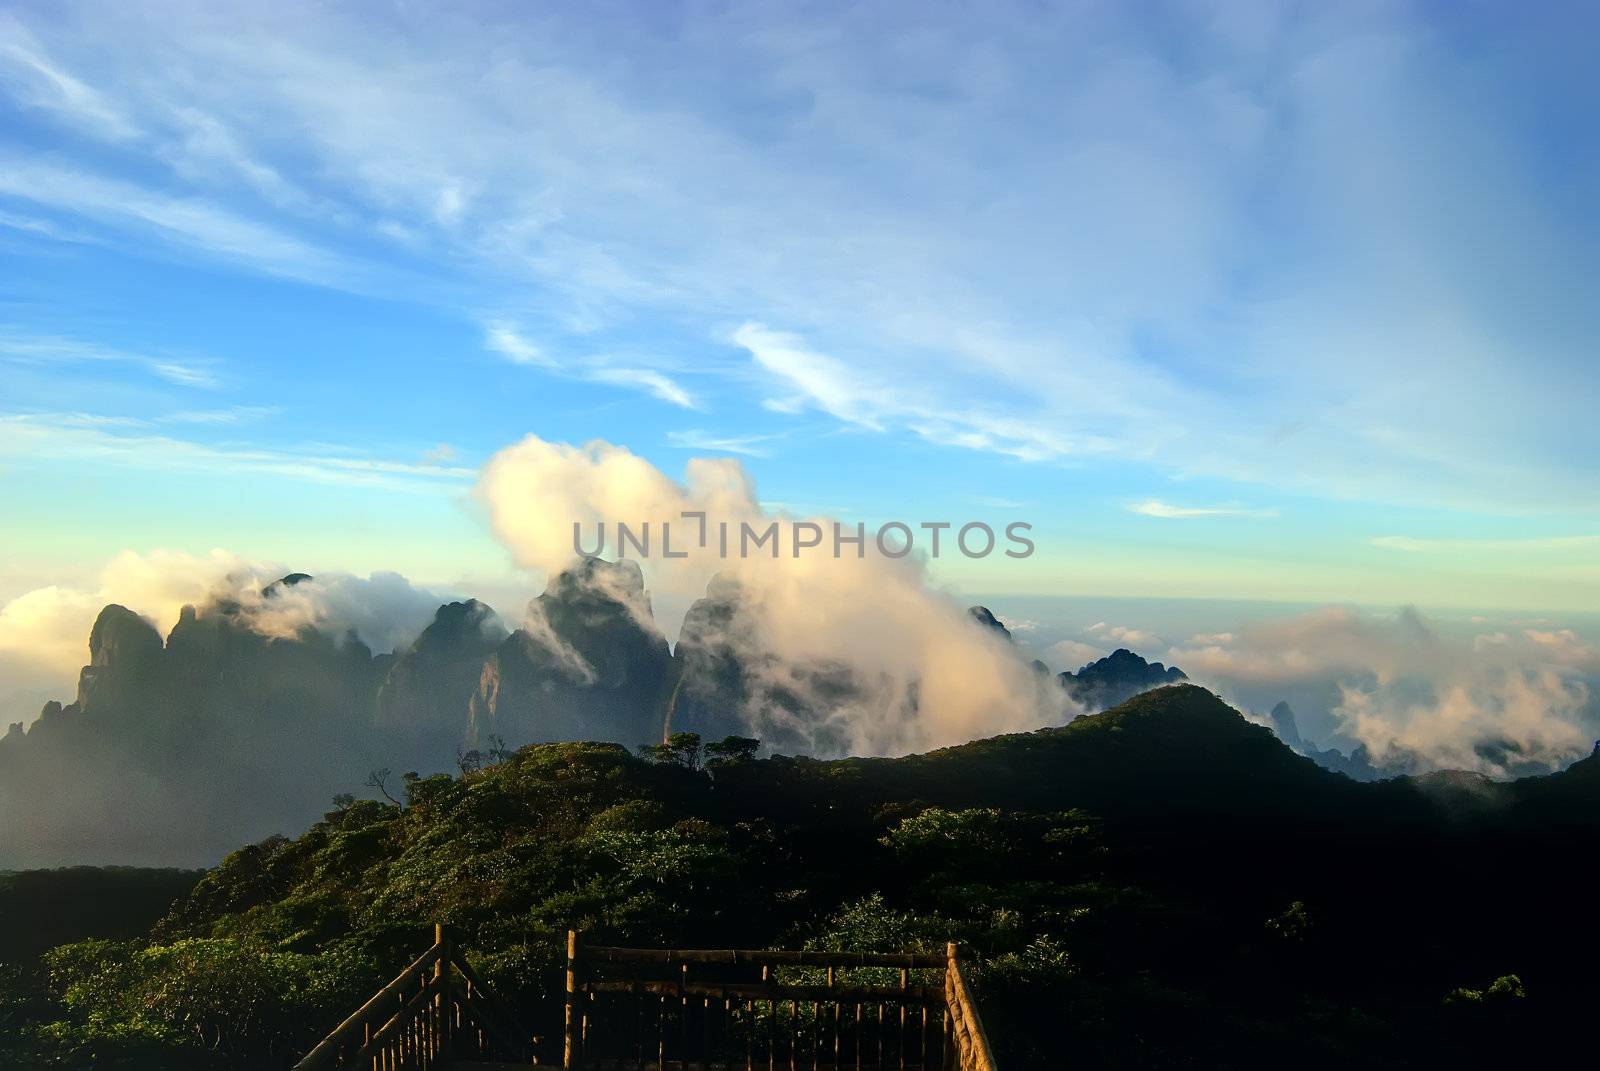 The cloud and mist of Shengtangshan mountain by xfdly5